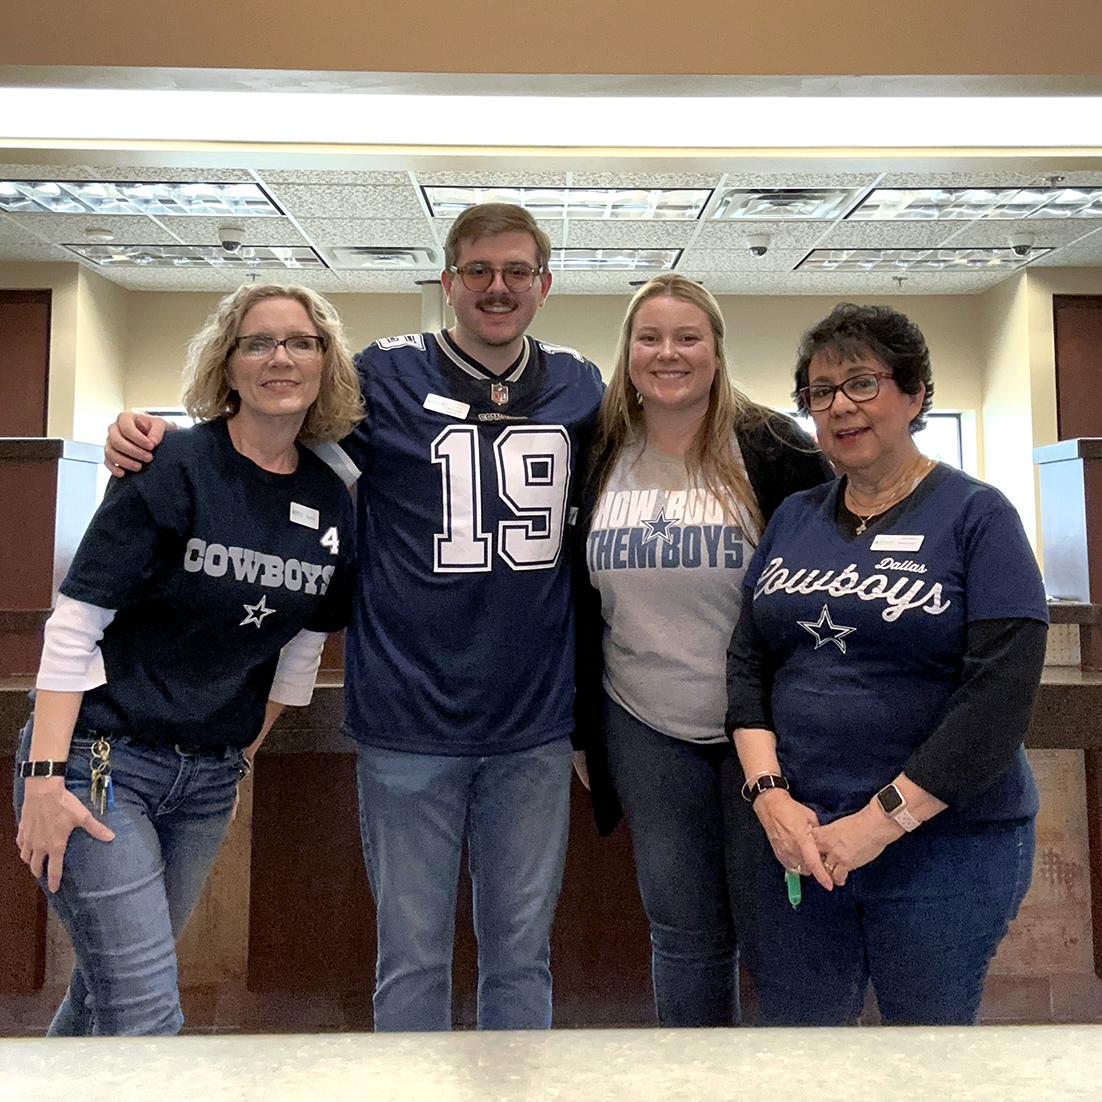 We love seeing that 'Team Spirit!' Whether you're into watching the game, the commercials, or the halftime show, it's always a great time when you're with great people. Your DATCU Family hopes y'all have an awesome Super Bowl Sunday!